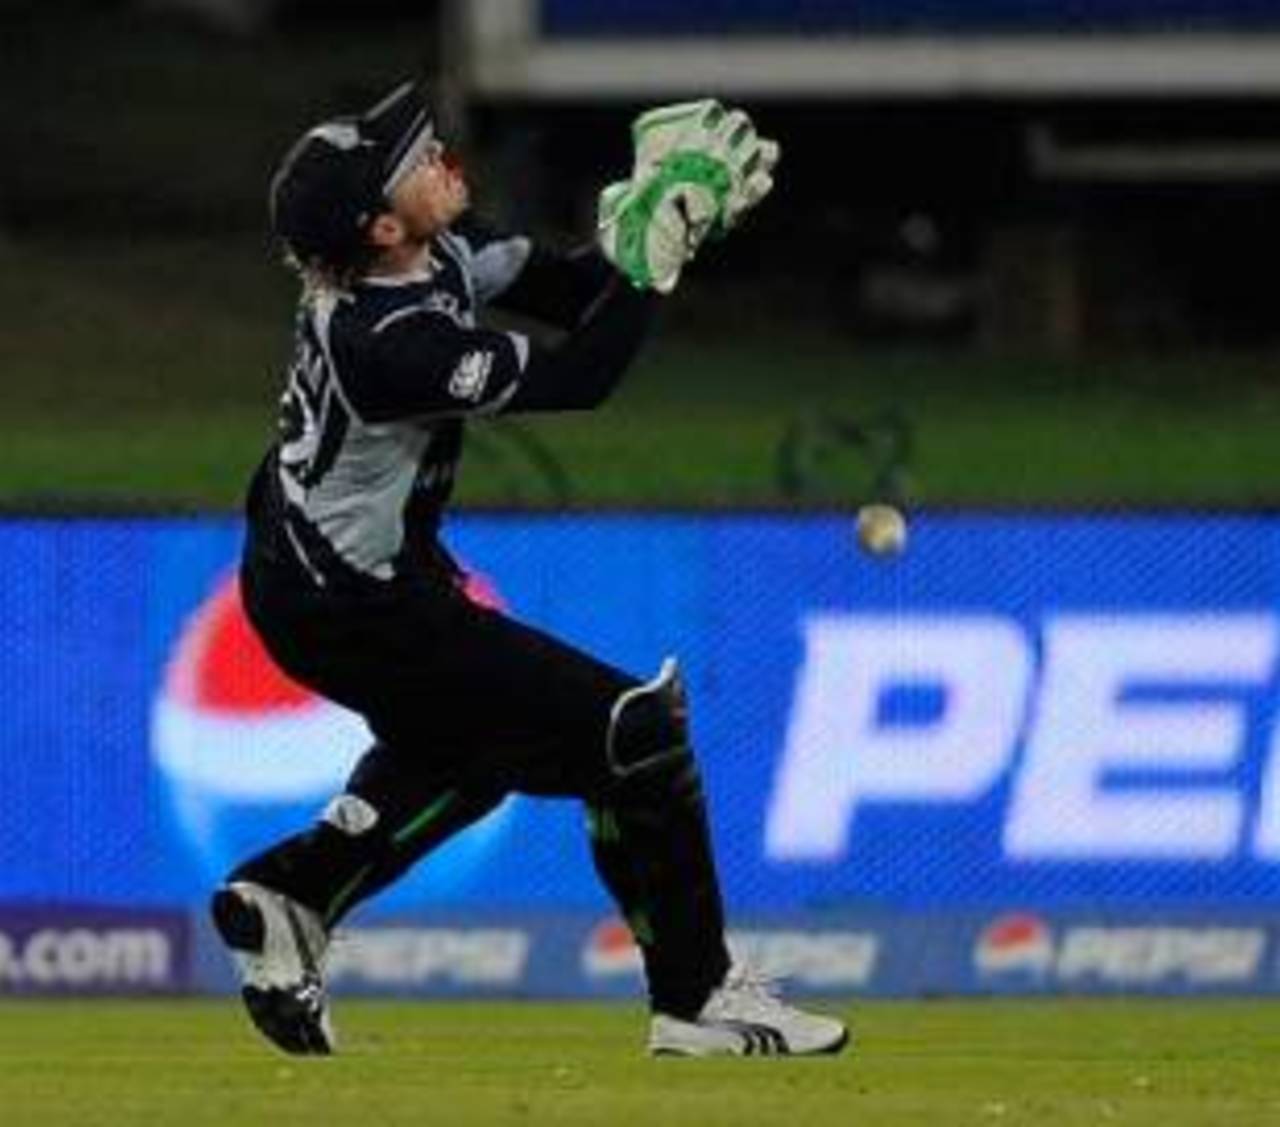 McCullum's drop may now rival that of Younis Khan's in the semi-final in terms of how much it eventually cost&nbsp;&nbsp;&bull;&nbsp;&nbsp;AFP